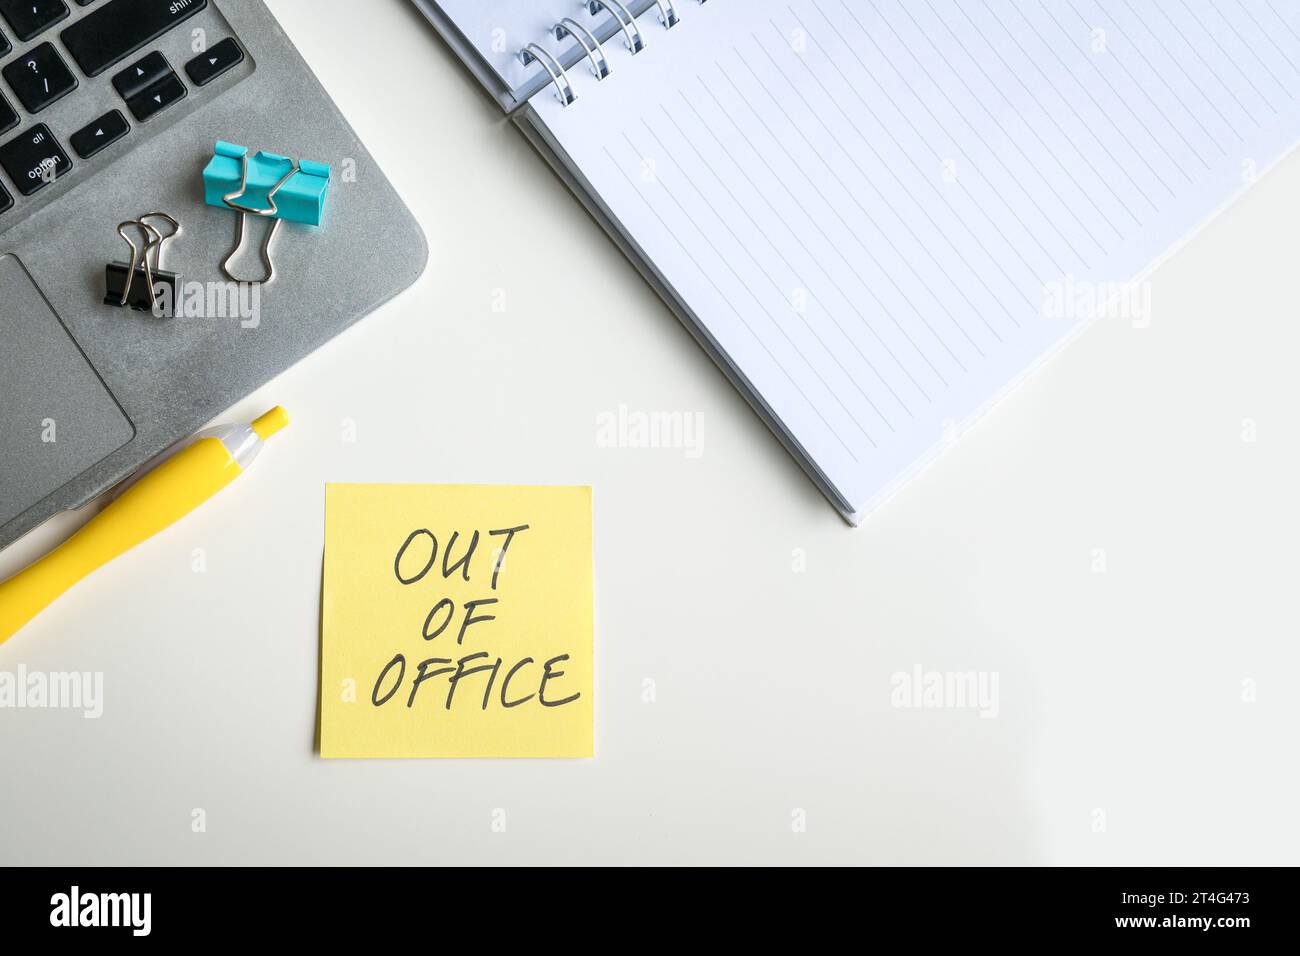 Top view of laptop and notepad with Out Of Office message written on a yellow adhesive paper. Stock Photo